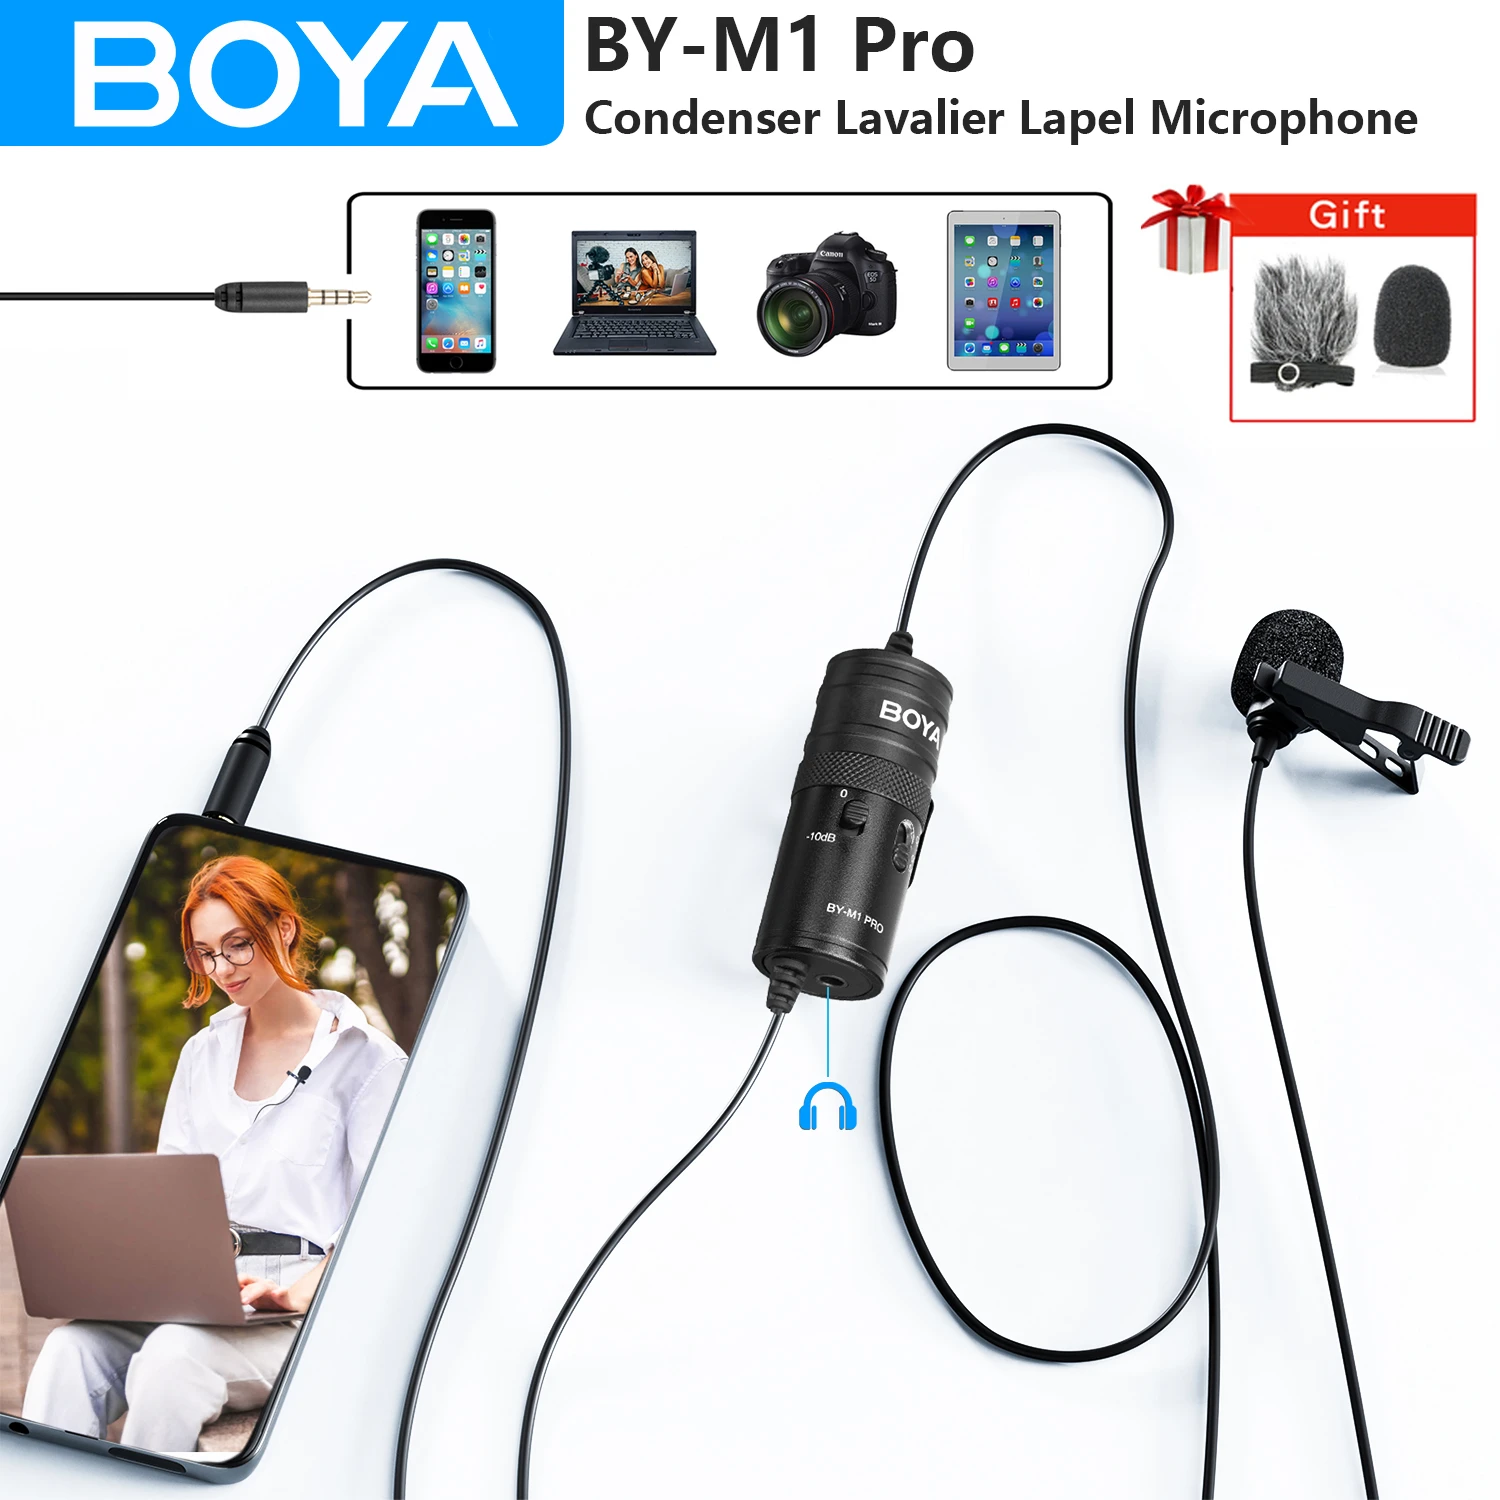 BOYA BY-M1 PRO 6m Omnidirectional Condenser Monitor Lavalier Microphone for Canon iPhone Podcast Nikon Sony iPhone 11 10 8 X 7